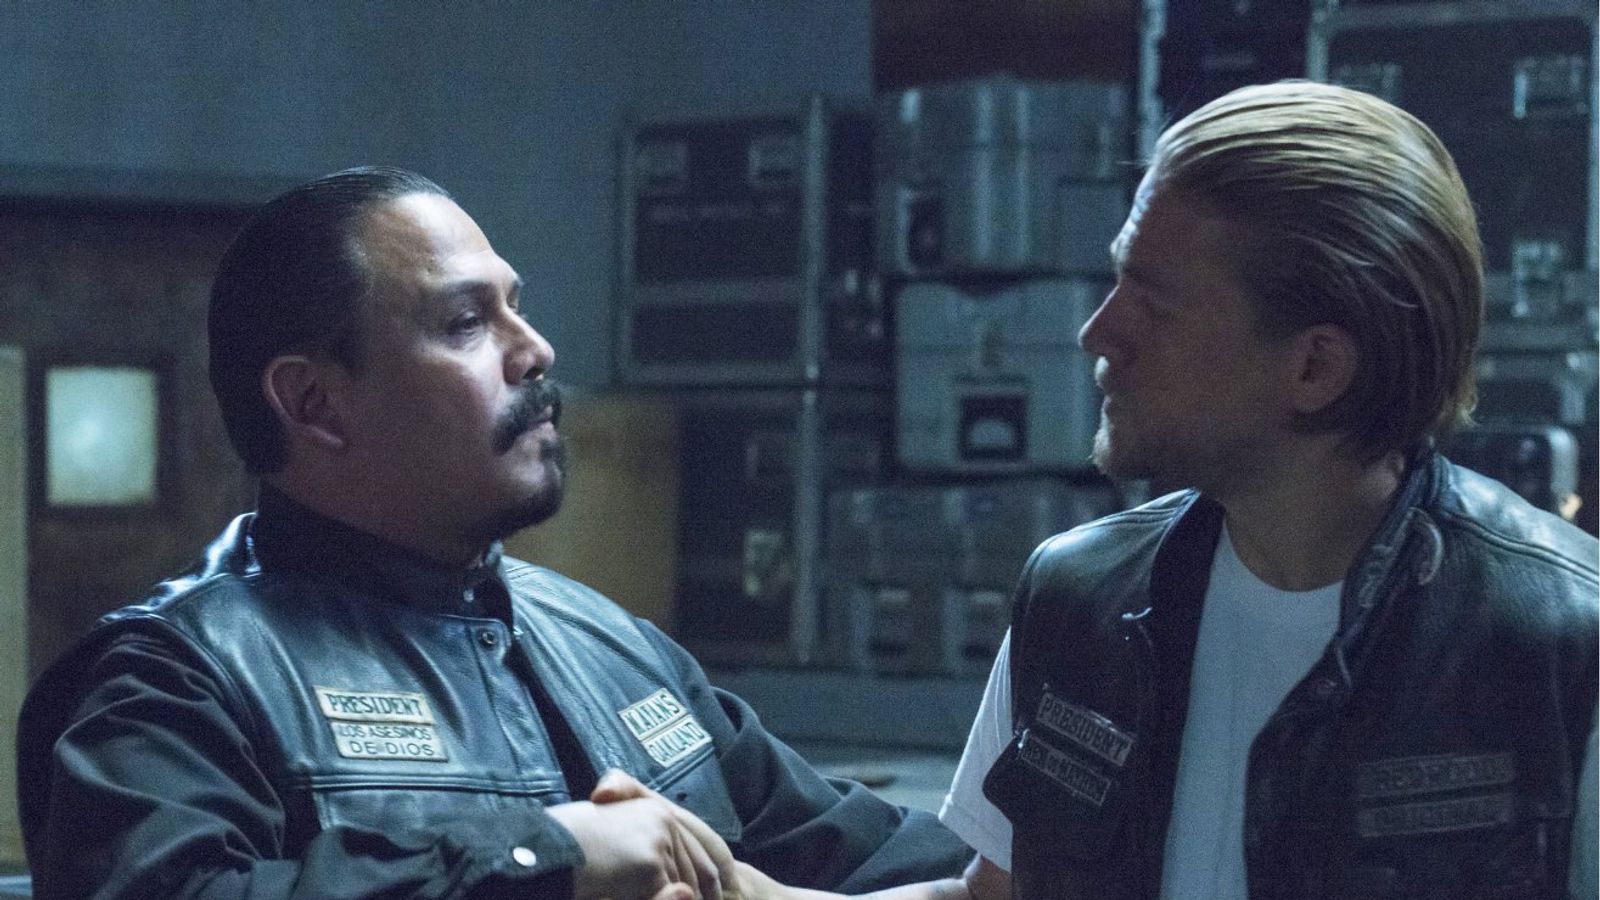 Sons Of Anarchy sequel Mayans MC confirmed by FX  Ents & Arts News